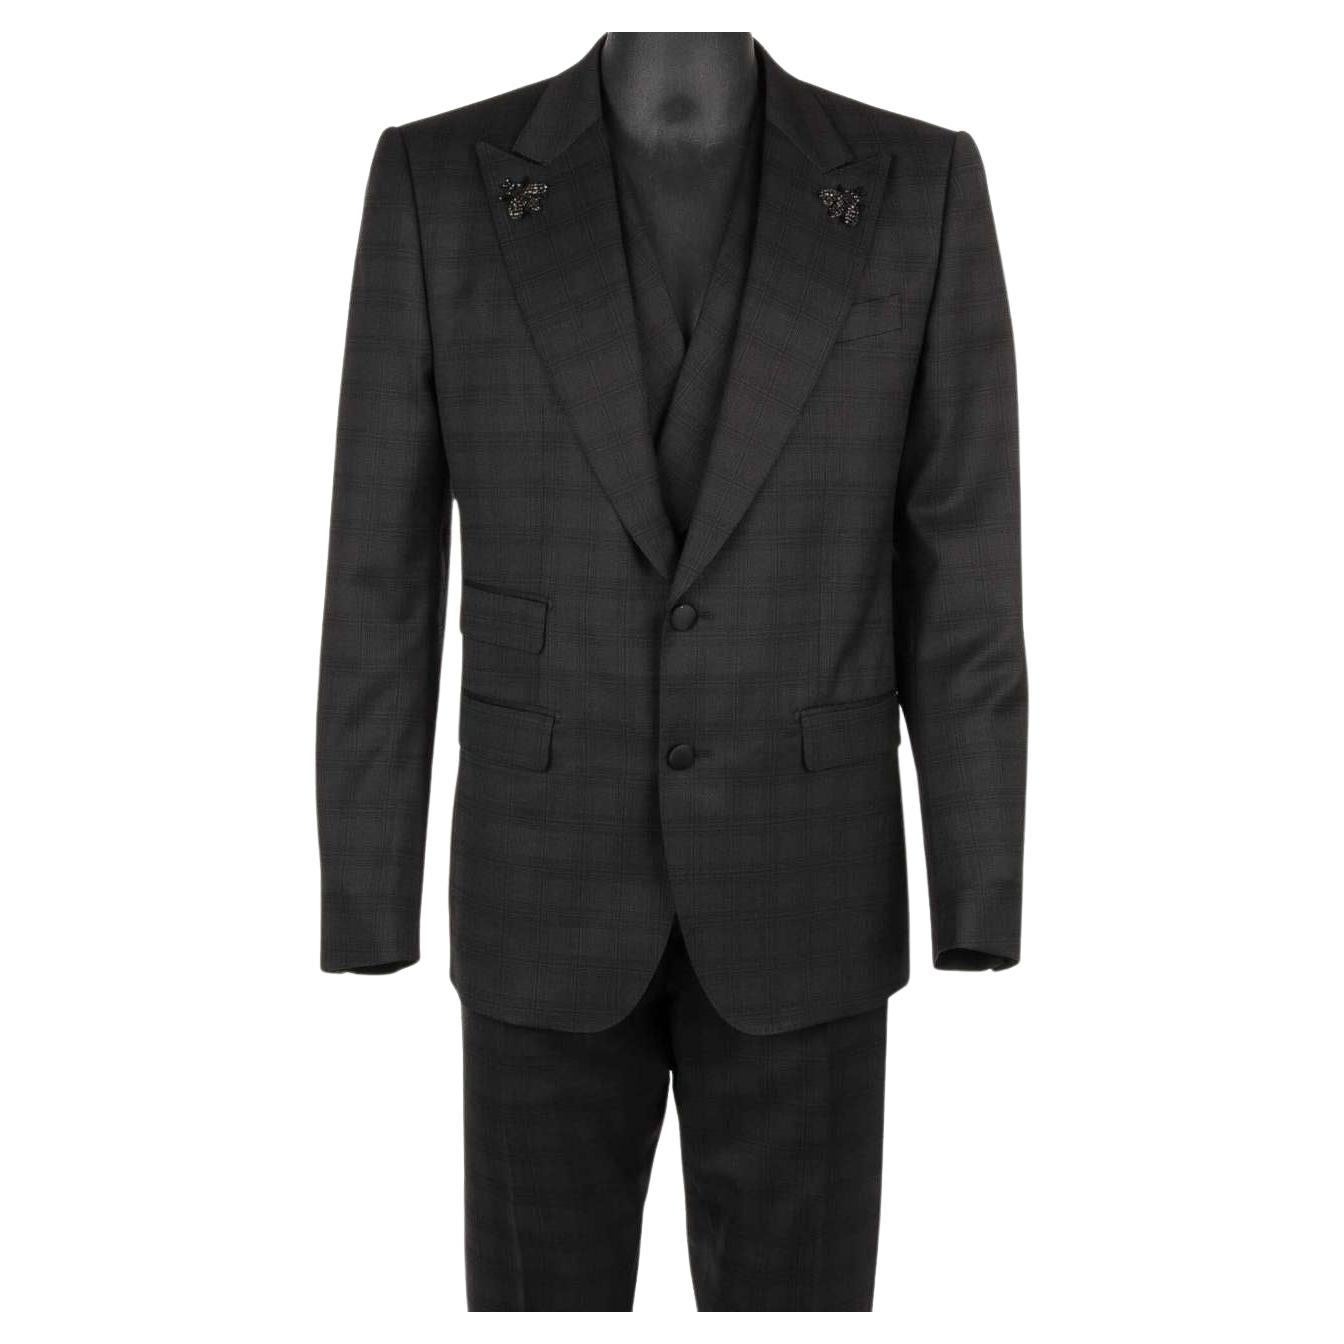 D&G 3 Piece Checked Suit Jacket Waistcoat Bee Brooch SICILIA Black 56 For Sale